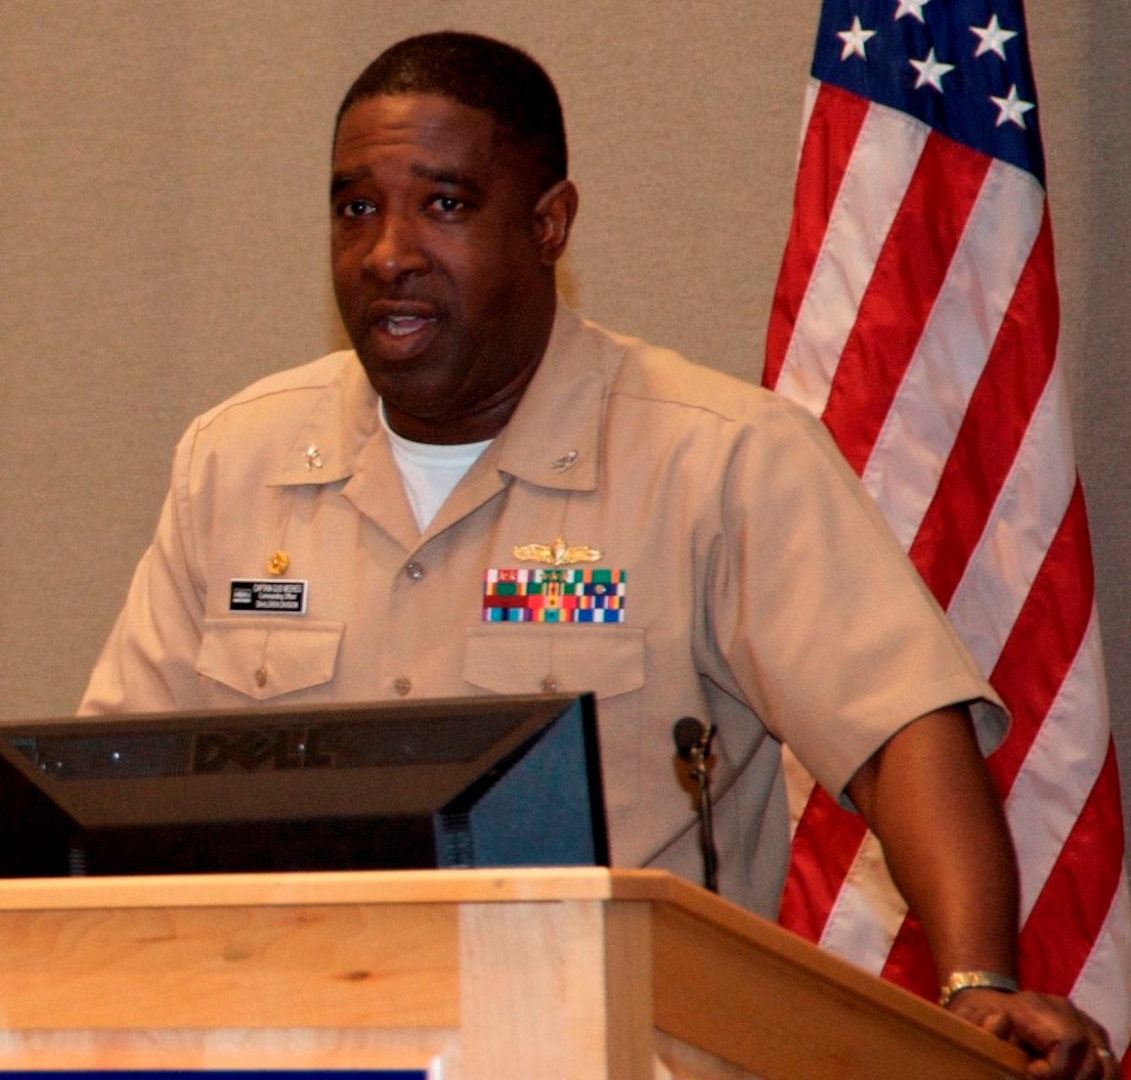 DAHLGREN, Va. (July 7, 2017) - Naval Surface Warfare Center Dahlgren Division (NSWCDD) Commanding Officer Capt. Godfrey 'Gus' Weekes speaks to military, government civilian, and defense contractors at the NSWCDD-sponsored 2017 Lesbian, Gay, Bisexual and Transgender (LGBT) Pride Month Observance. “LGBT Pride Month affirms our commitment to increase awareness, mutual respect, and understanding of all members of our workforce," said Weekes. "Let’s take the theme 'Ask, Share and Learn' to heart and embrace knowing more about our colleagues and celebrating our collective diversity.” Established by Presidential Proclamation in 2000, LGBT Pride Month is held annually and recognizes the importance of diversity within our society as well as the many achievements of LGBT individuals.  (U.S. Navy Photo by Patrick Dunn/Released)